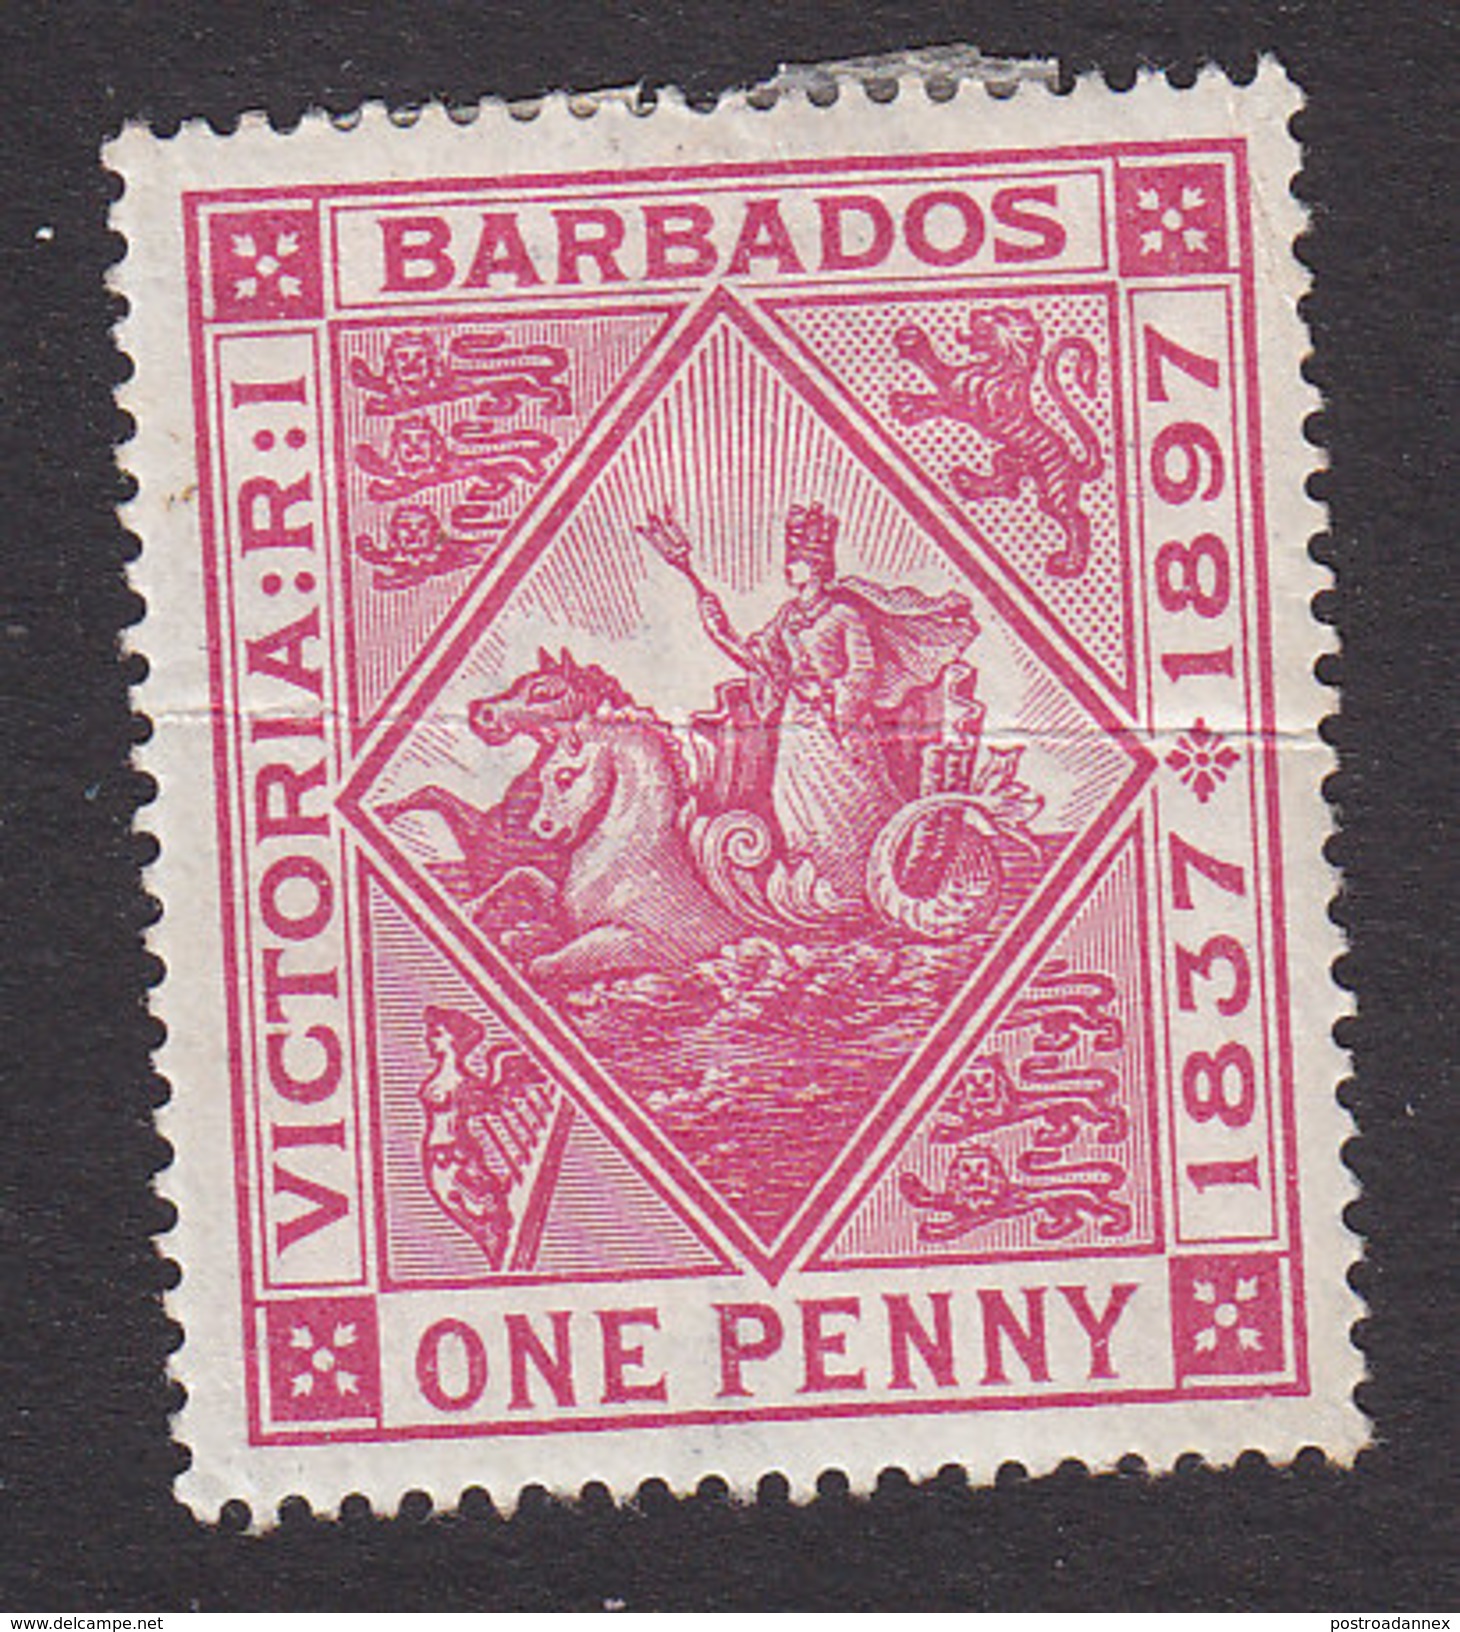 Barbados, Scott #83, Mint Hinged, Badge Of The Colony, Issued 1897 - Barbados (...-1966)